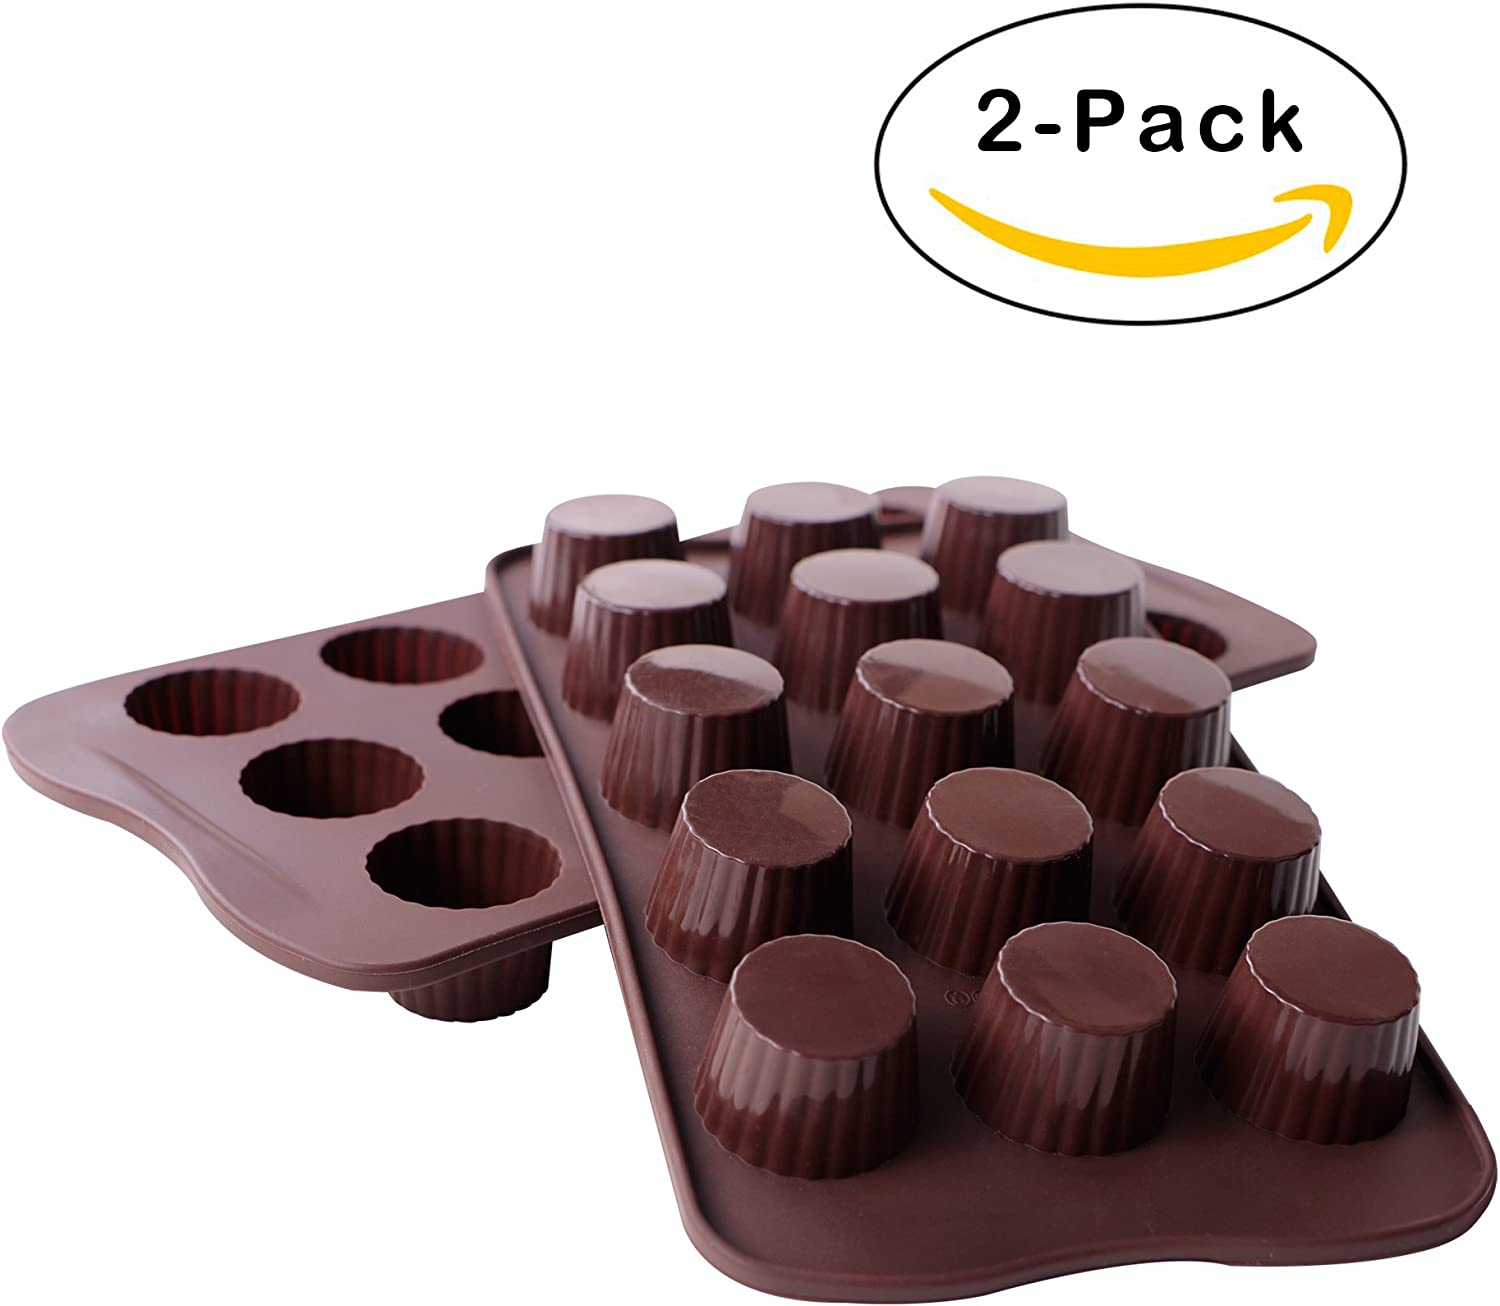 JOERSH 30-Cup Chocolate Candy Mold/Bite Size Peanut Butter Cup Mold  Silicone Molds for Chocolate, Jello, Keto Fat Bombs and Cordial